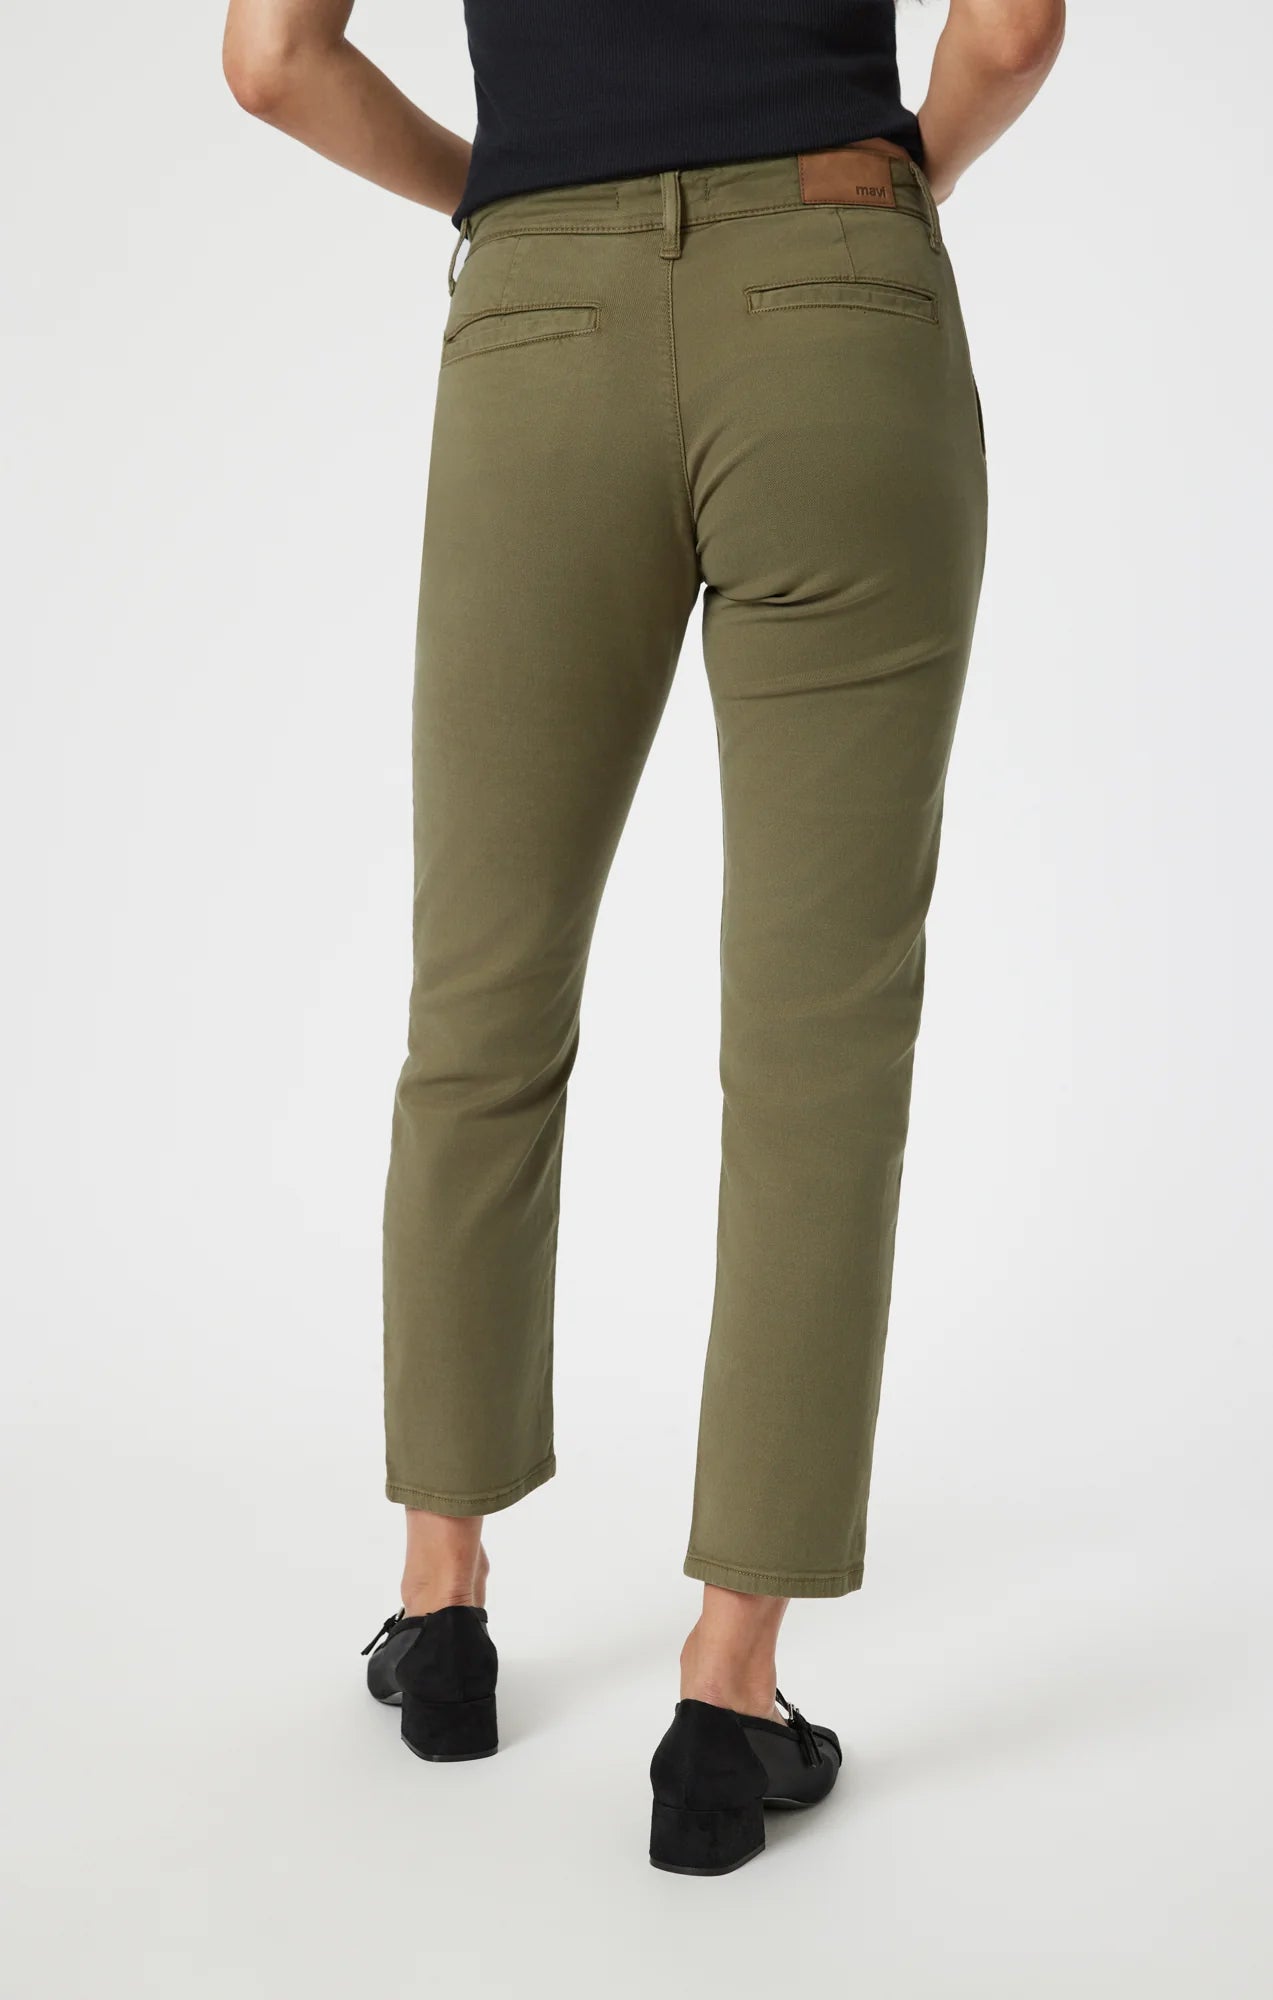 Brooke Slim Chino Pants - Green Luxe Twill - Blue Sky Fashions & Lingerie